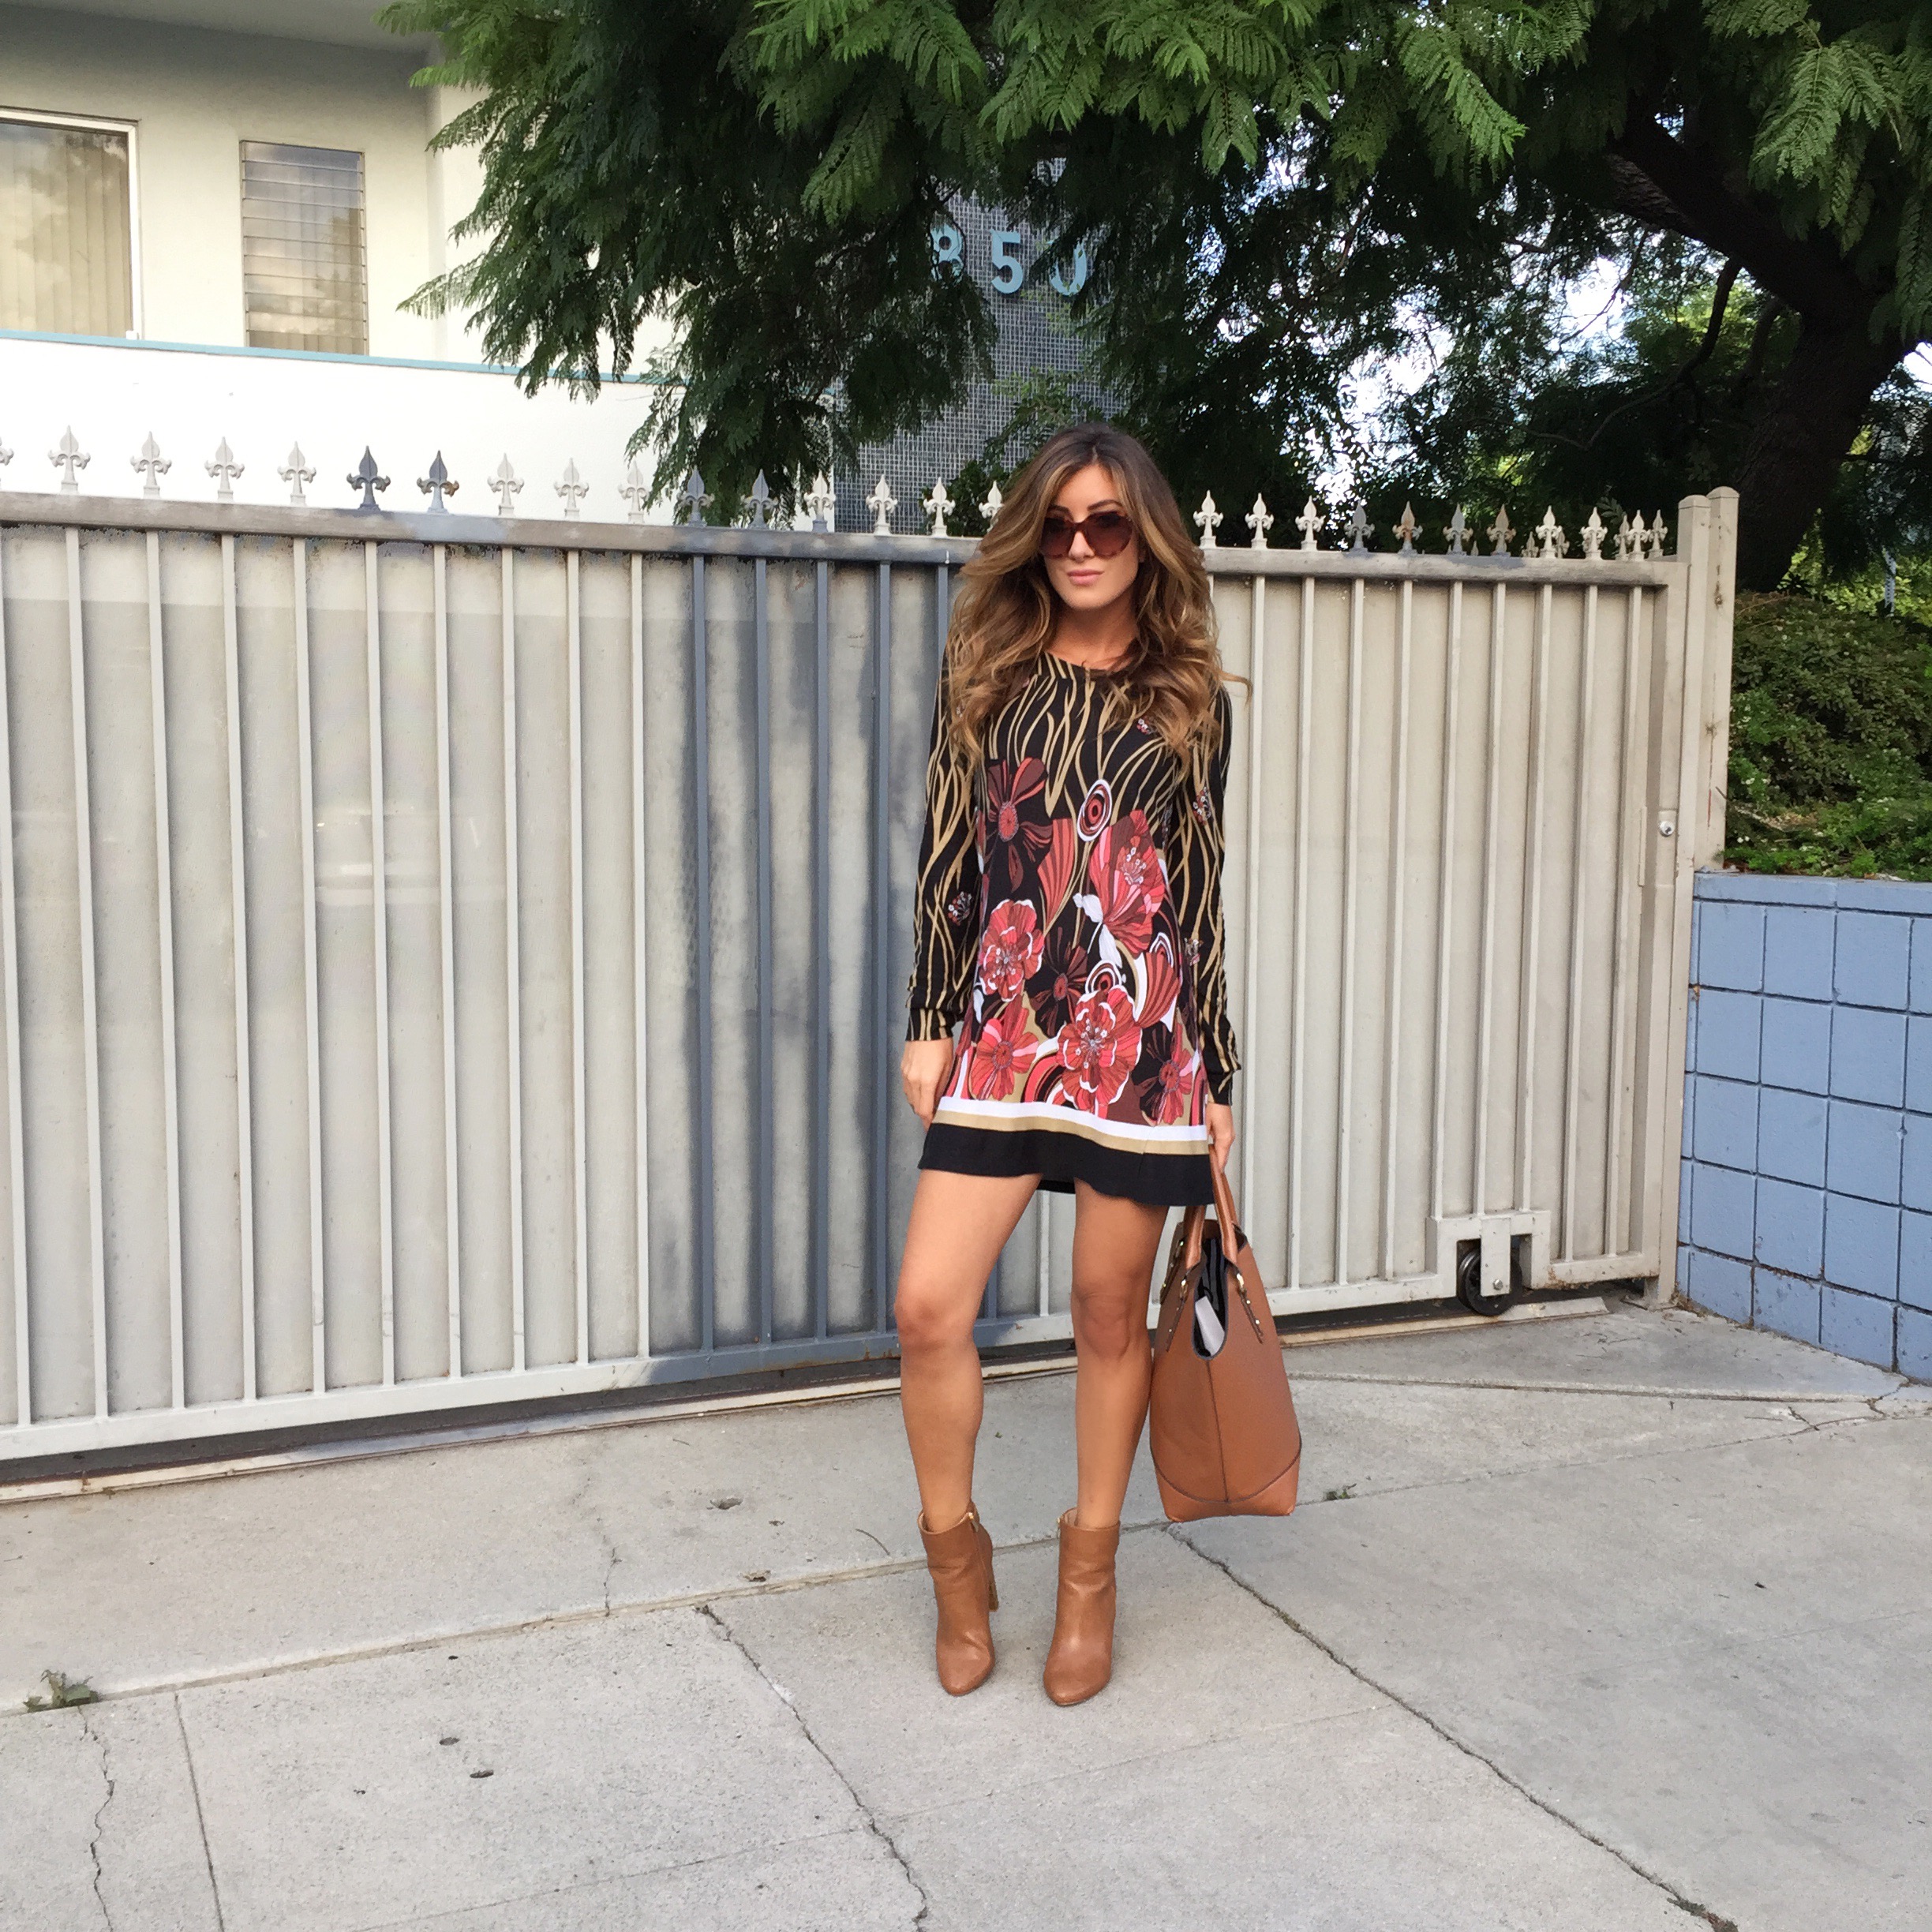 SEVENTIES inspired outfit